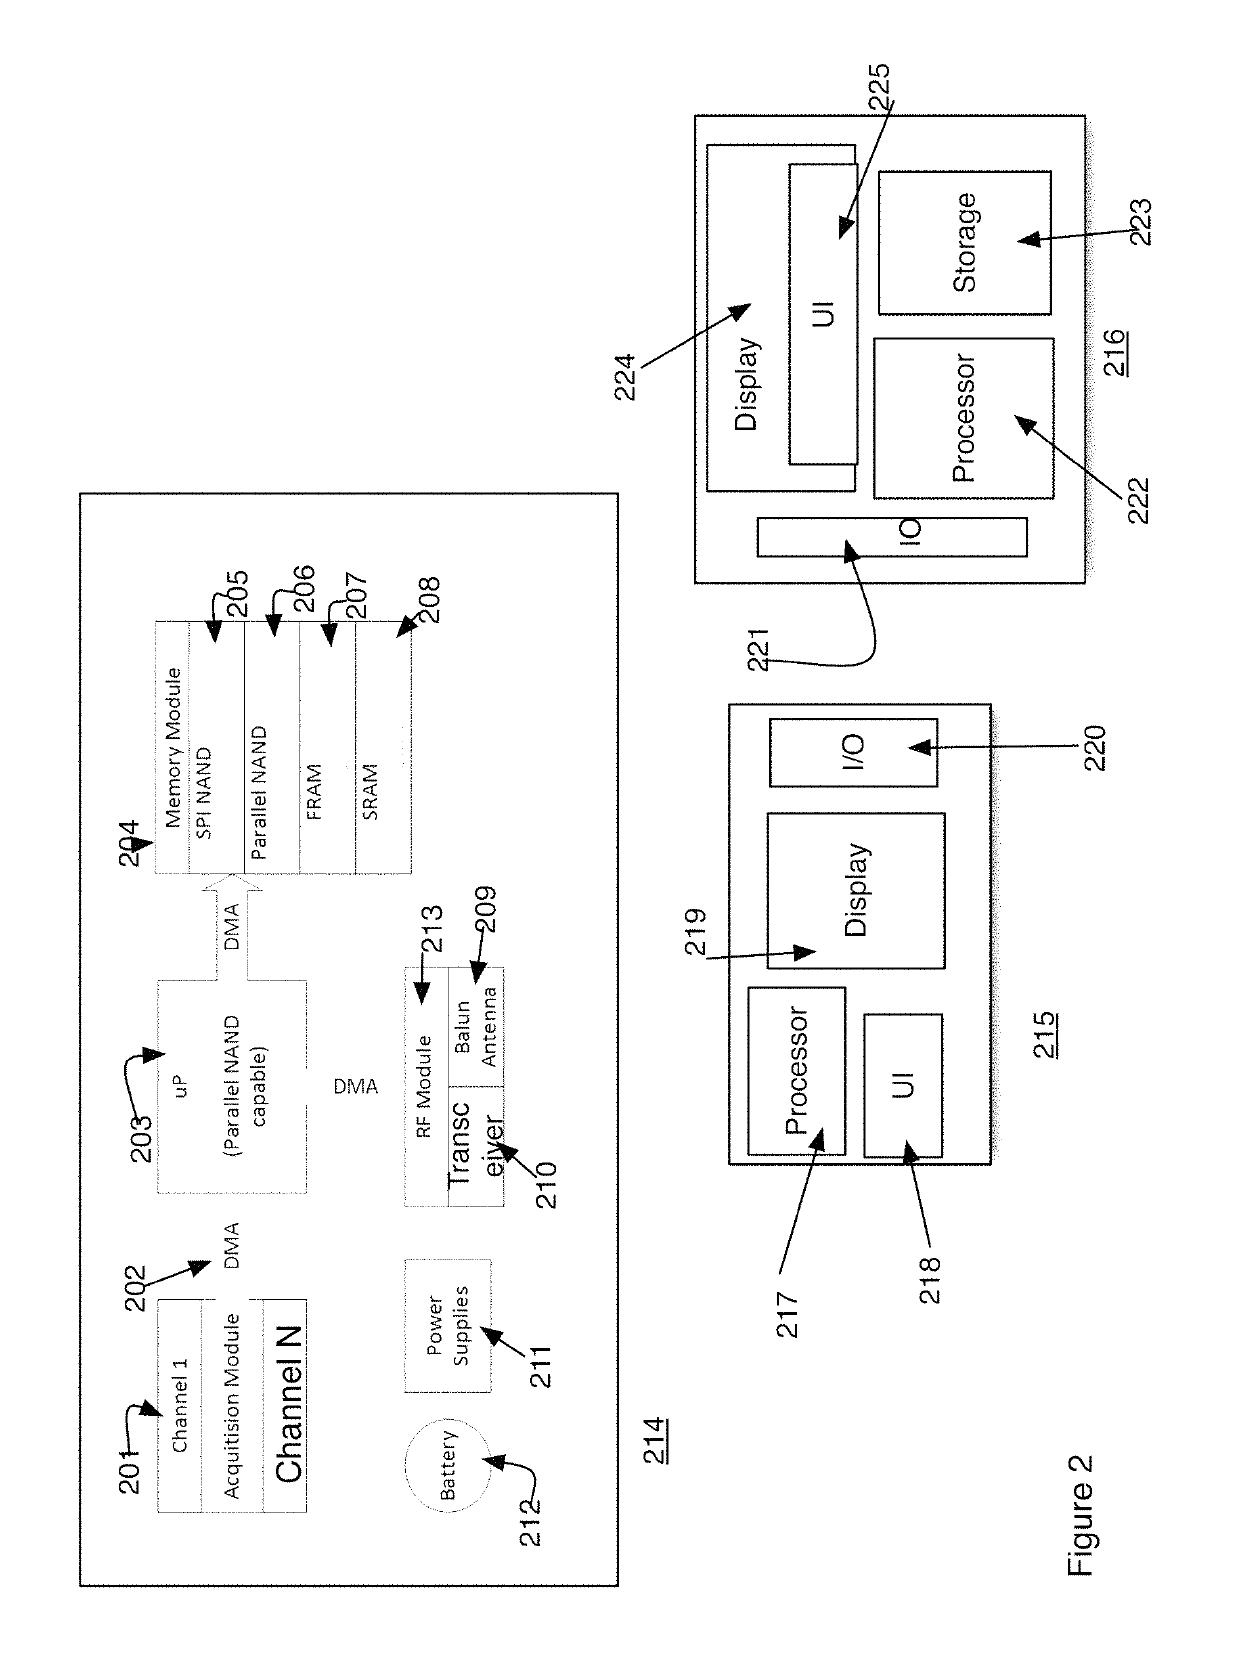 Electrocardiogram device and methods